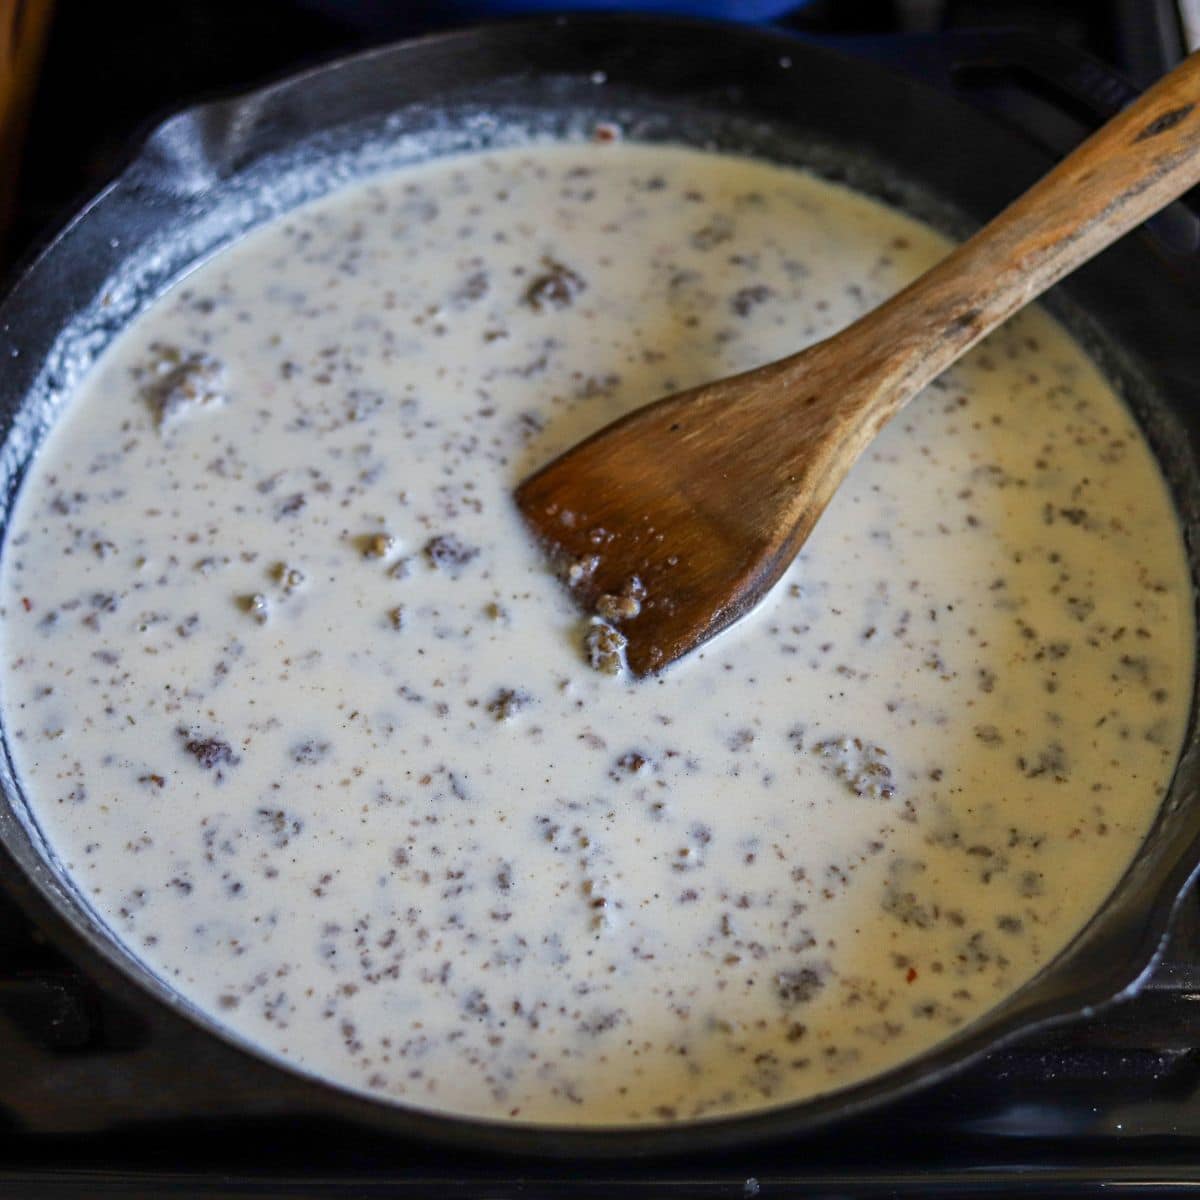 sausage breakfast gravy being cooked in a large skillet